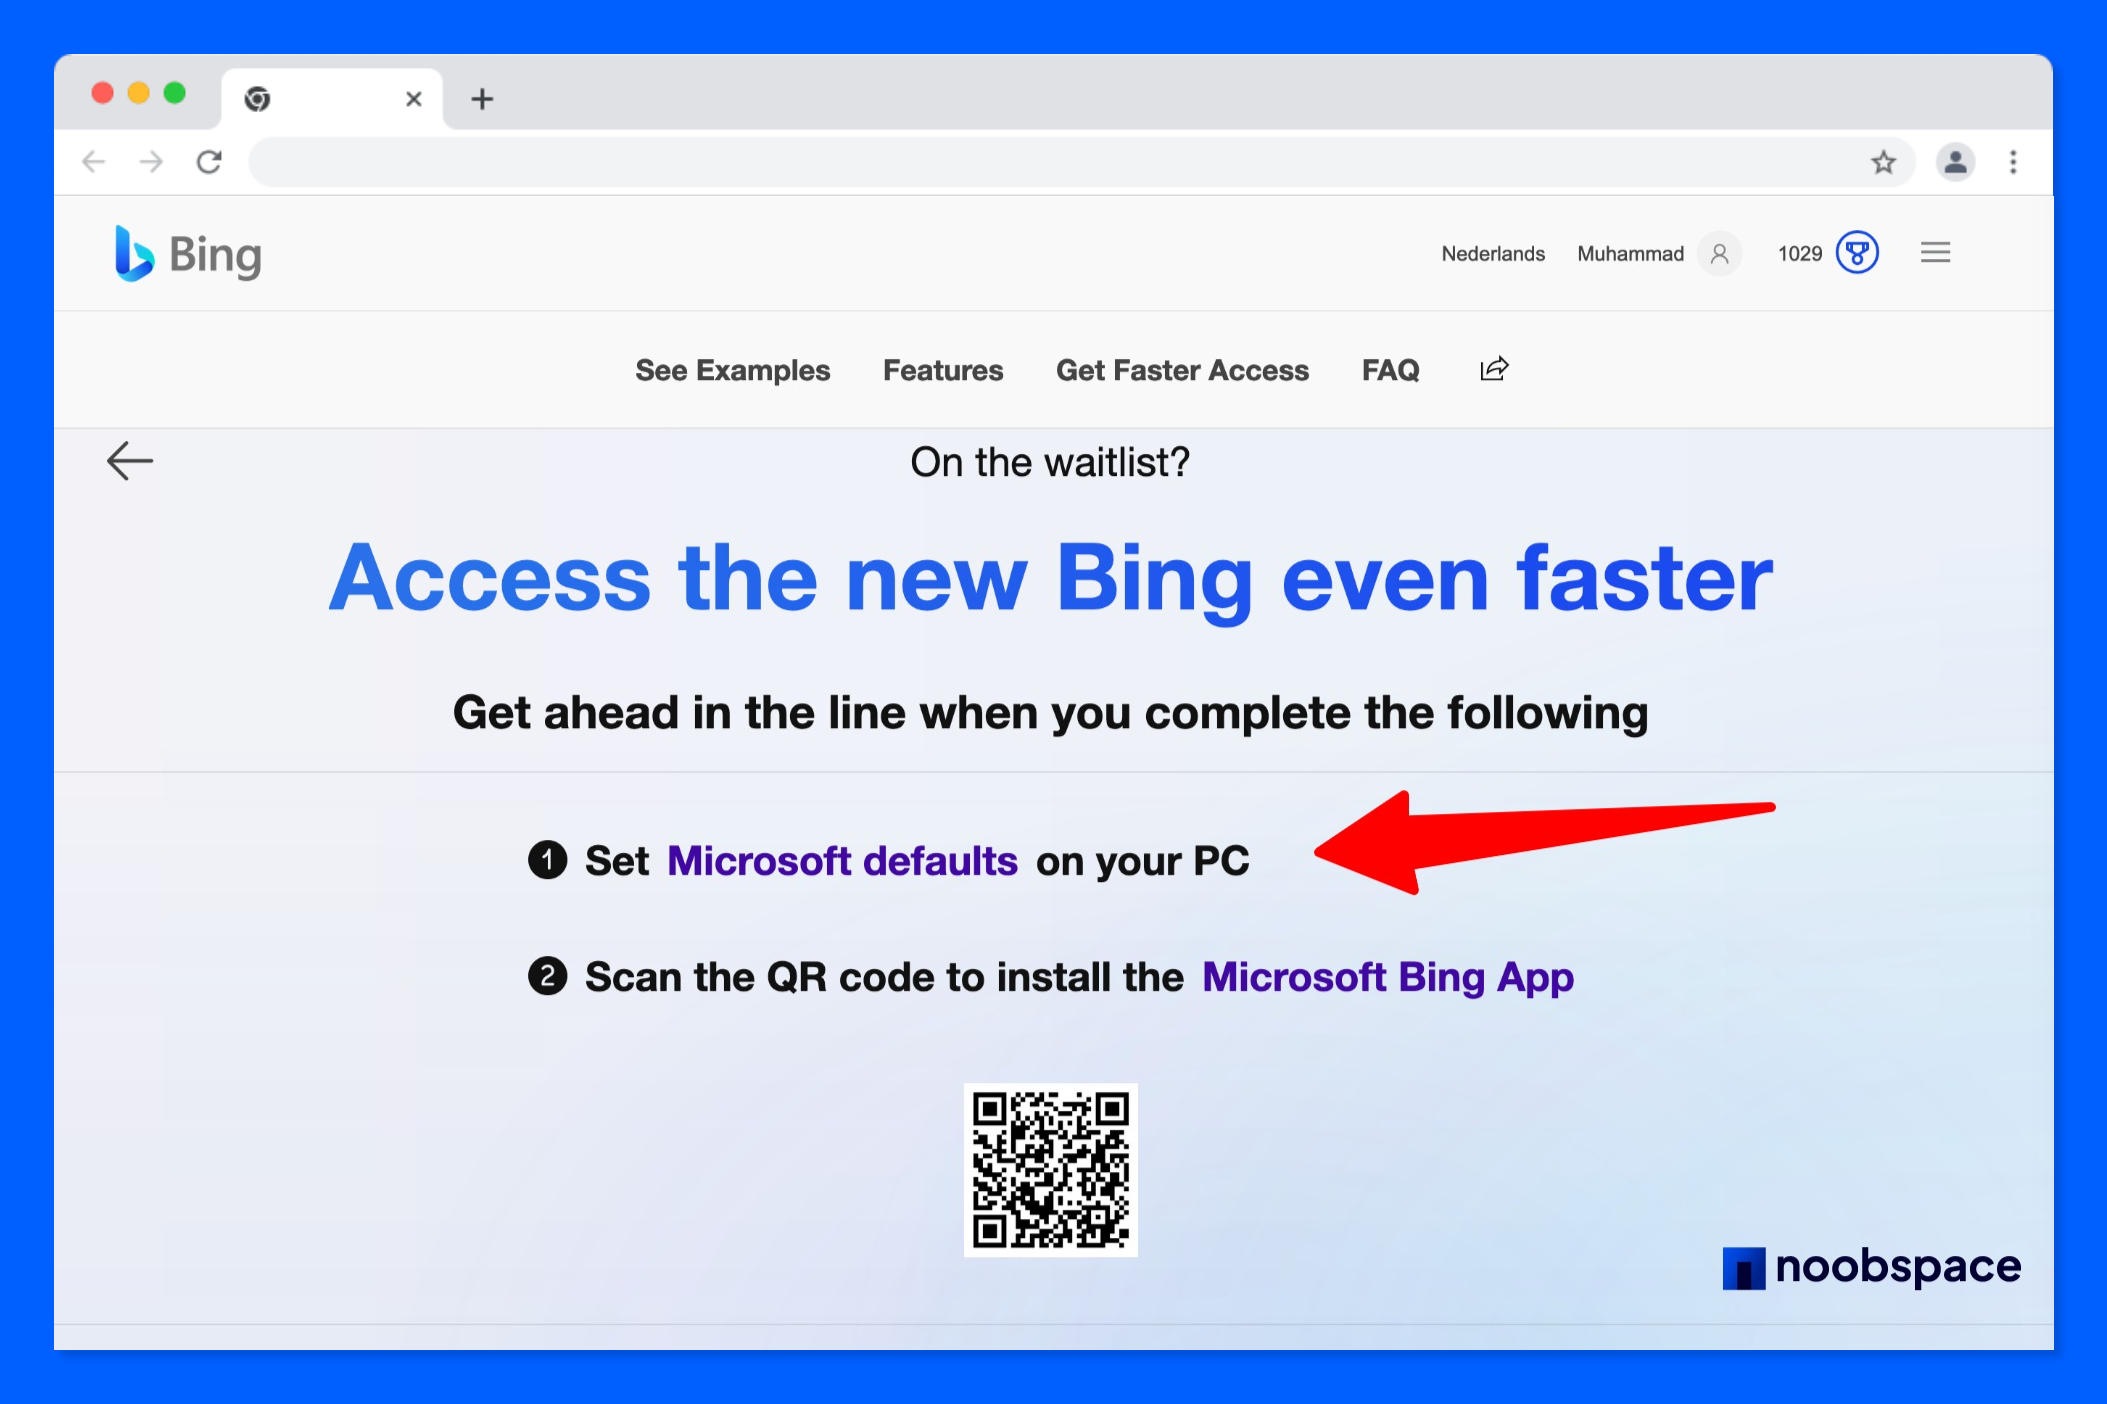 Access new Bing faster by setting Microsoft apps default on your devices